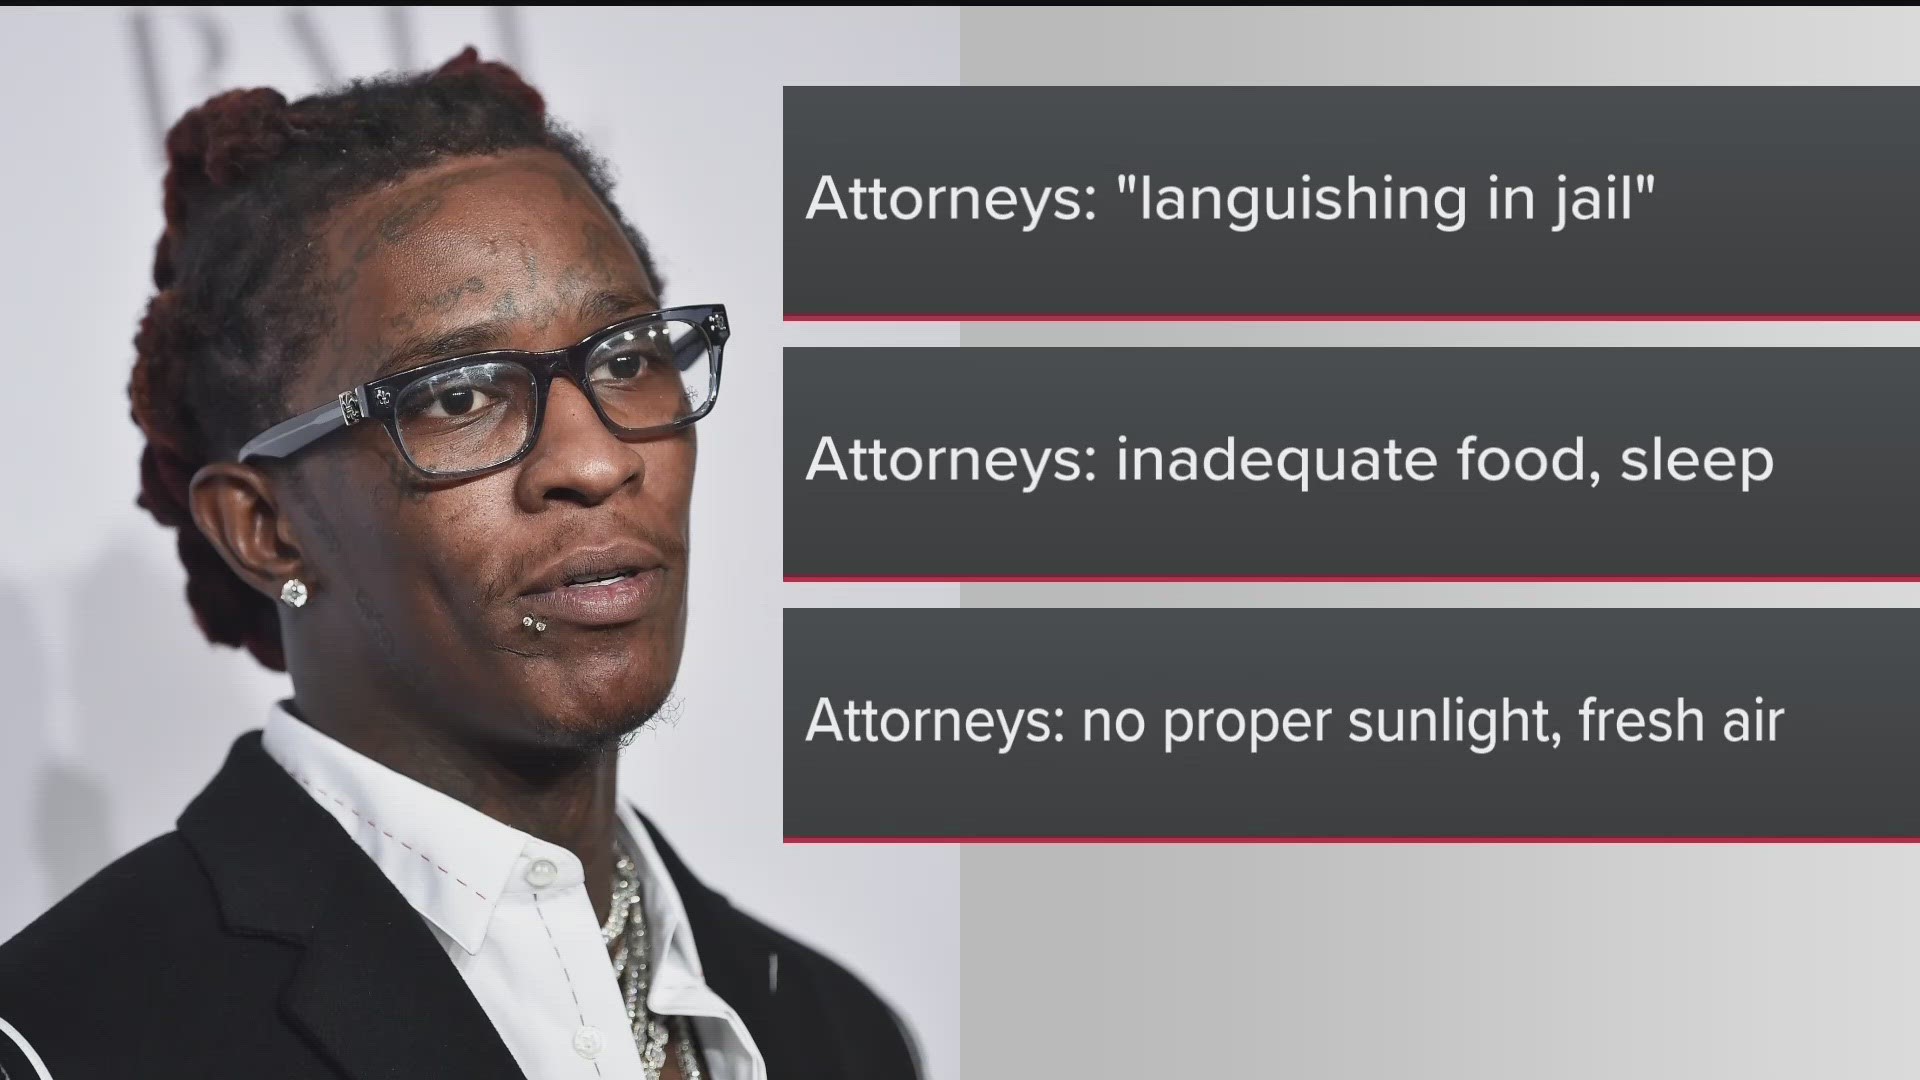 His attorney said he expects the rapper to be in court Friday to continue jury selection.